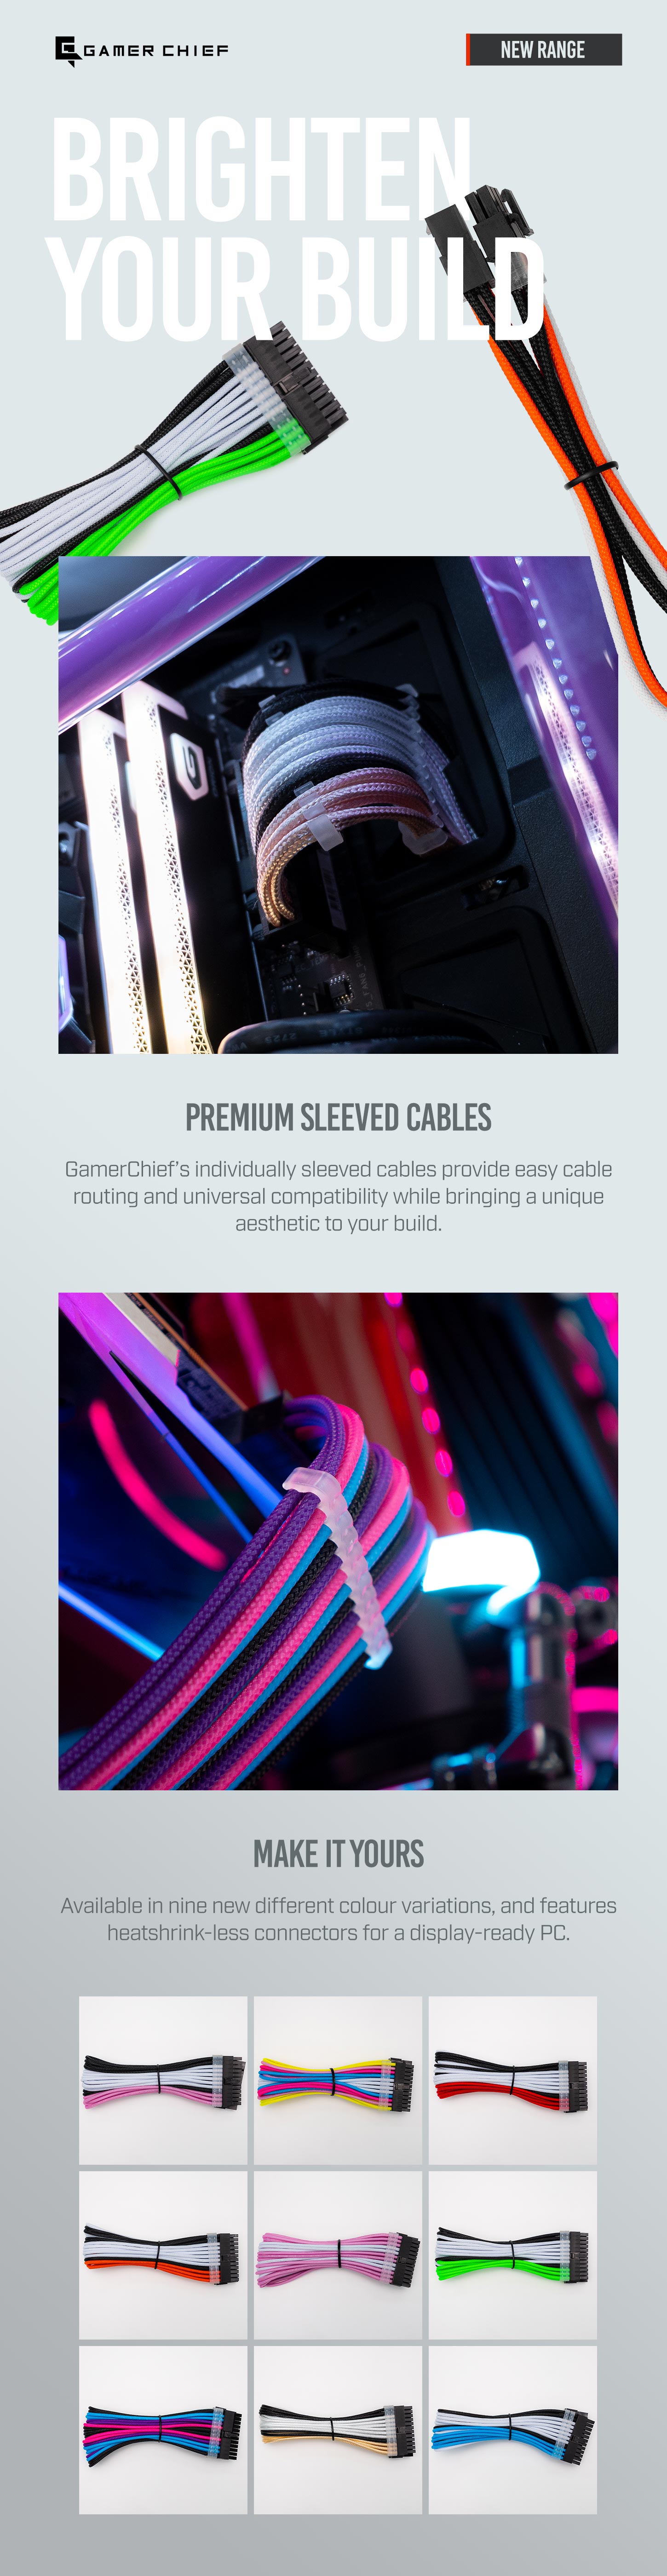 A large marketing image providing additional information about the product GamerChief Elite Series 8-Pin EPS 30cm Sleeved Extension Cable (Gold/White/Black) - Additional alt info not provided